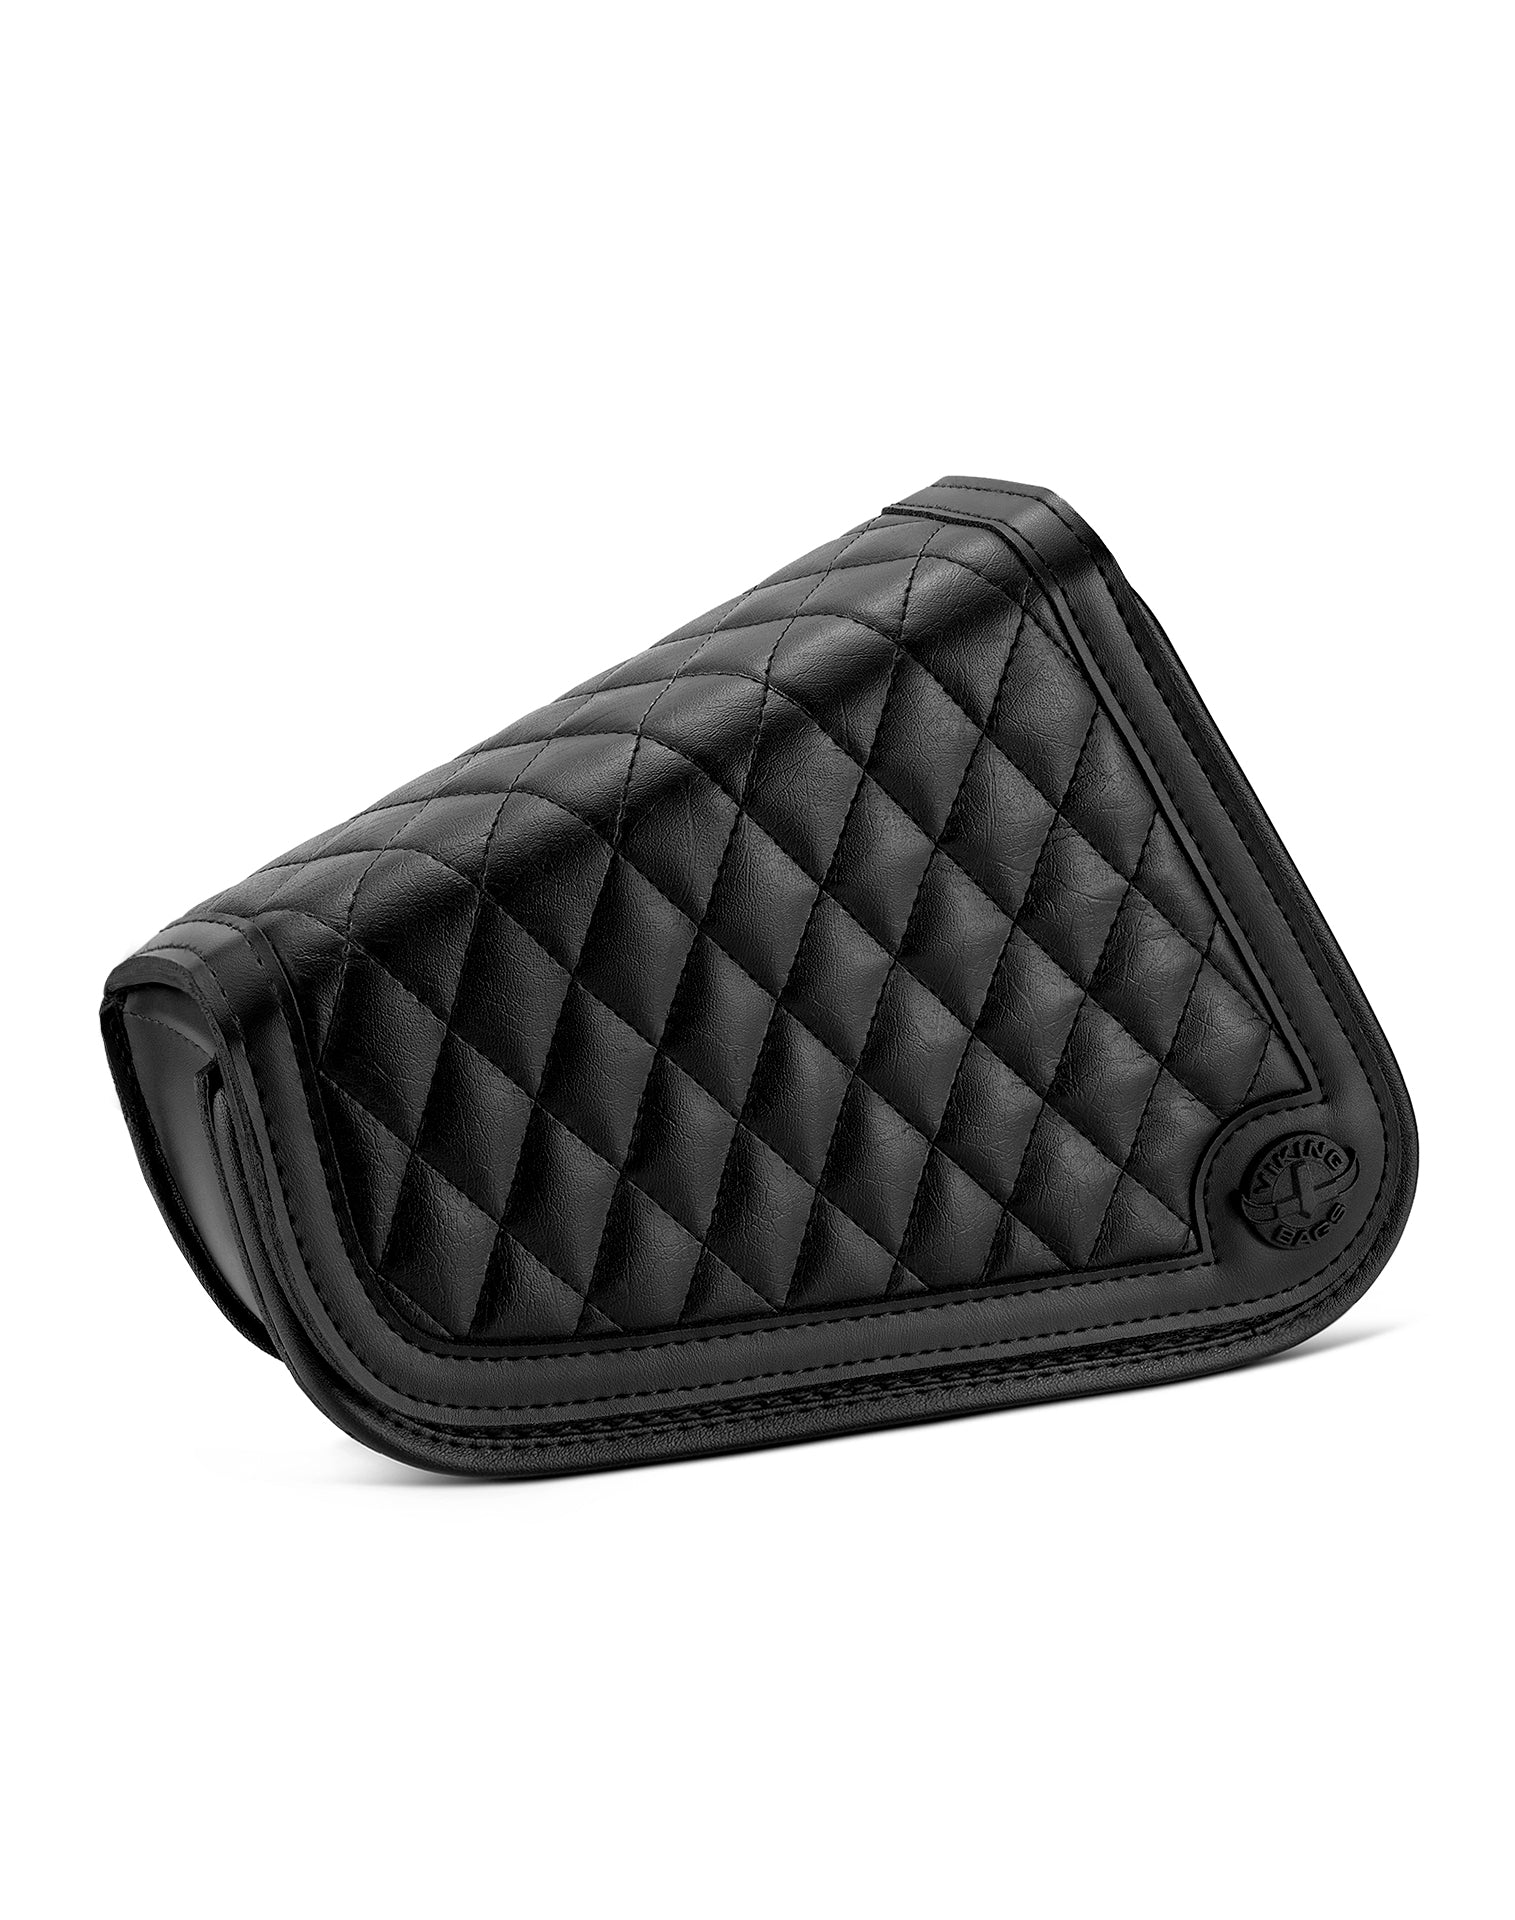 Viking Iron Born Diamond Stitch Leather Motorcycle Swing Arm Bag for Harley Davidson Sportster Main view